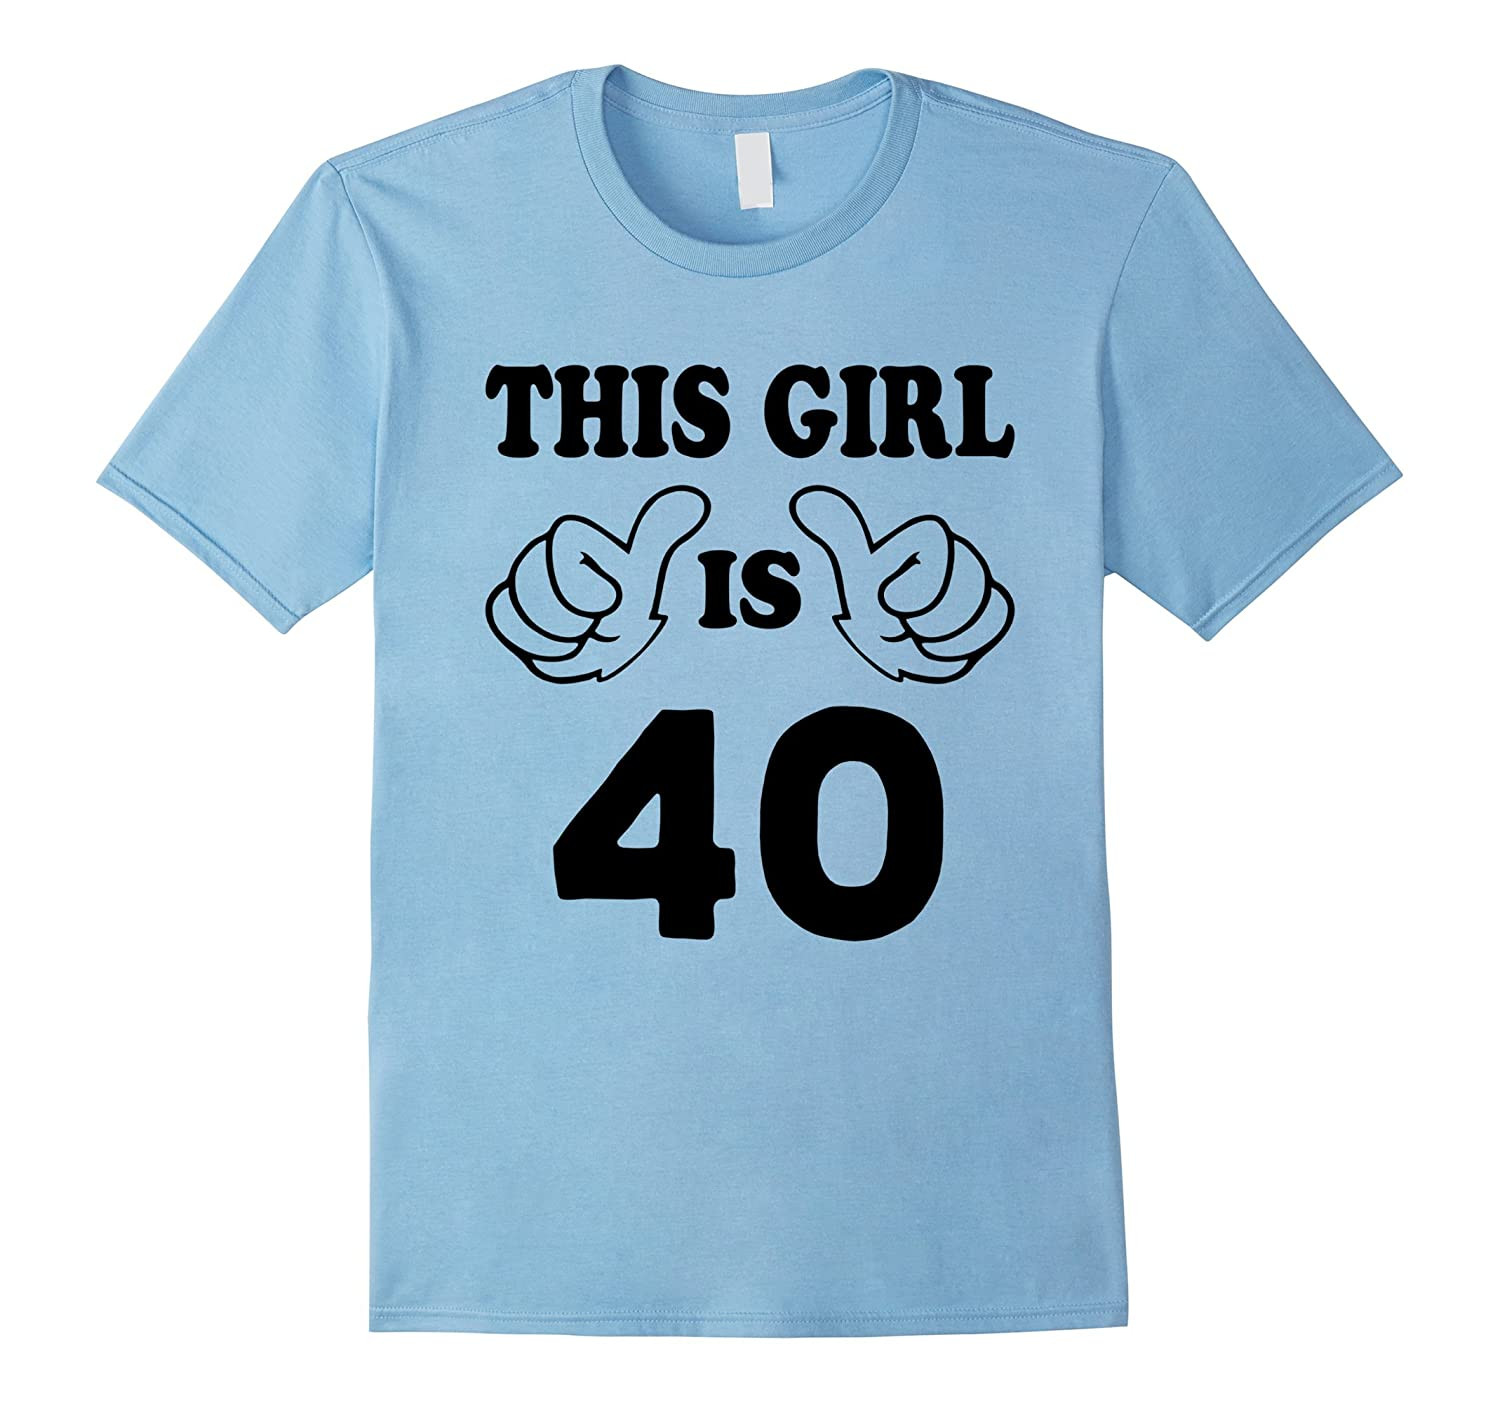 40 Year Old Birthday Gift Ideas
 This Girl is forty 40 Years Old 40th Birthday Gift Ideas